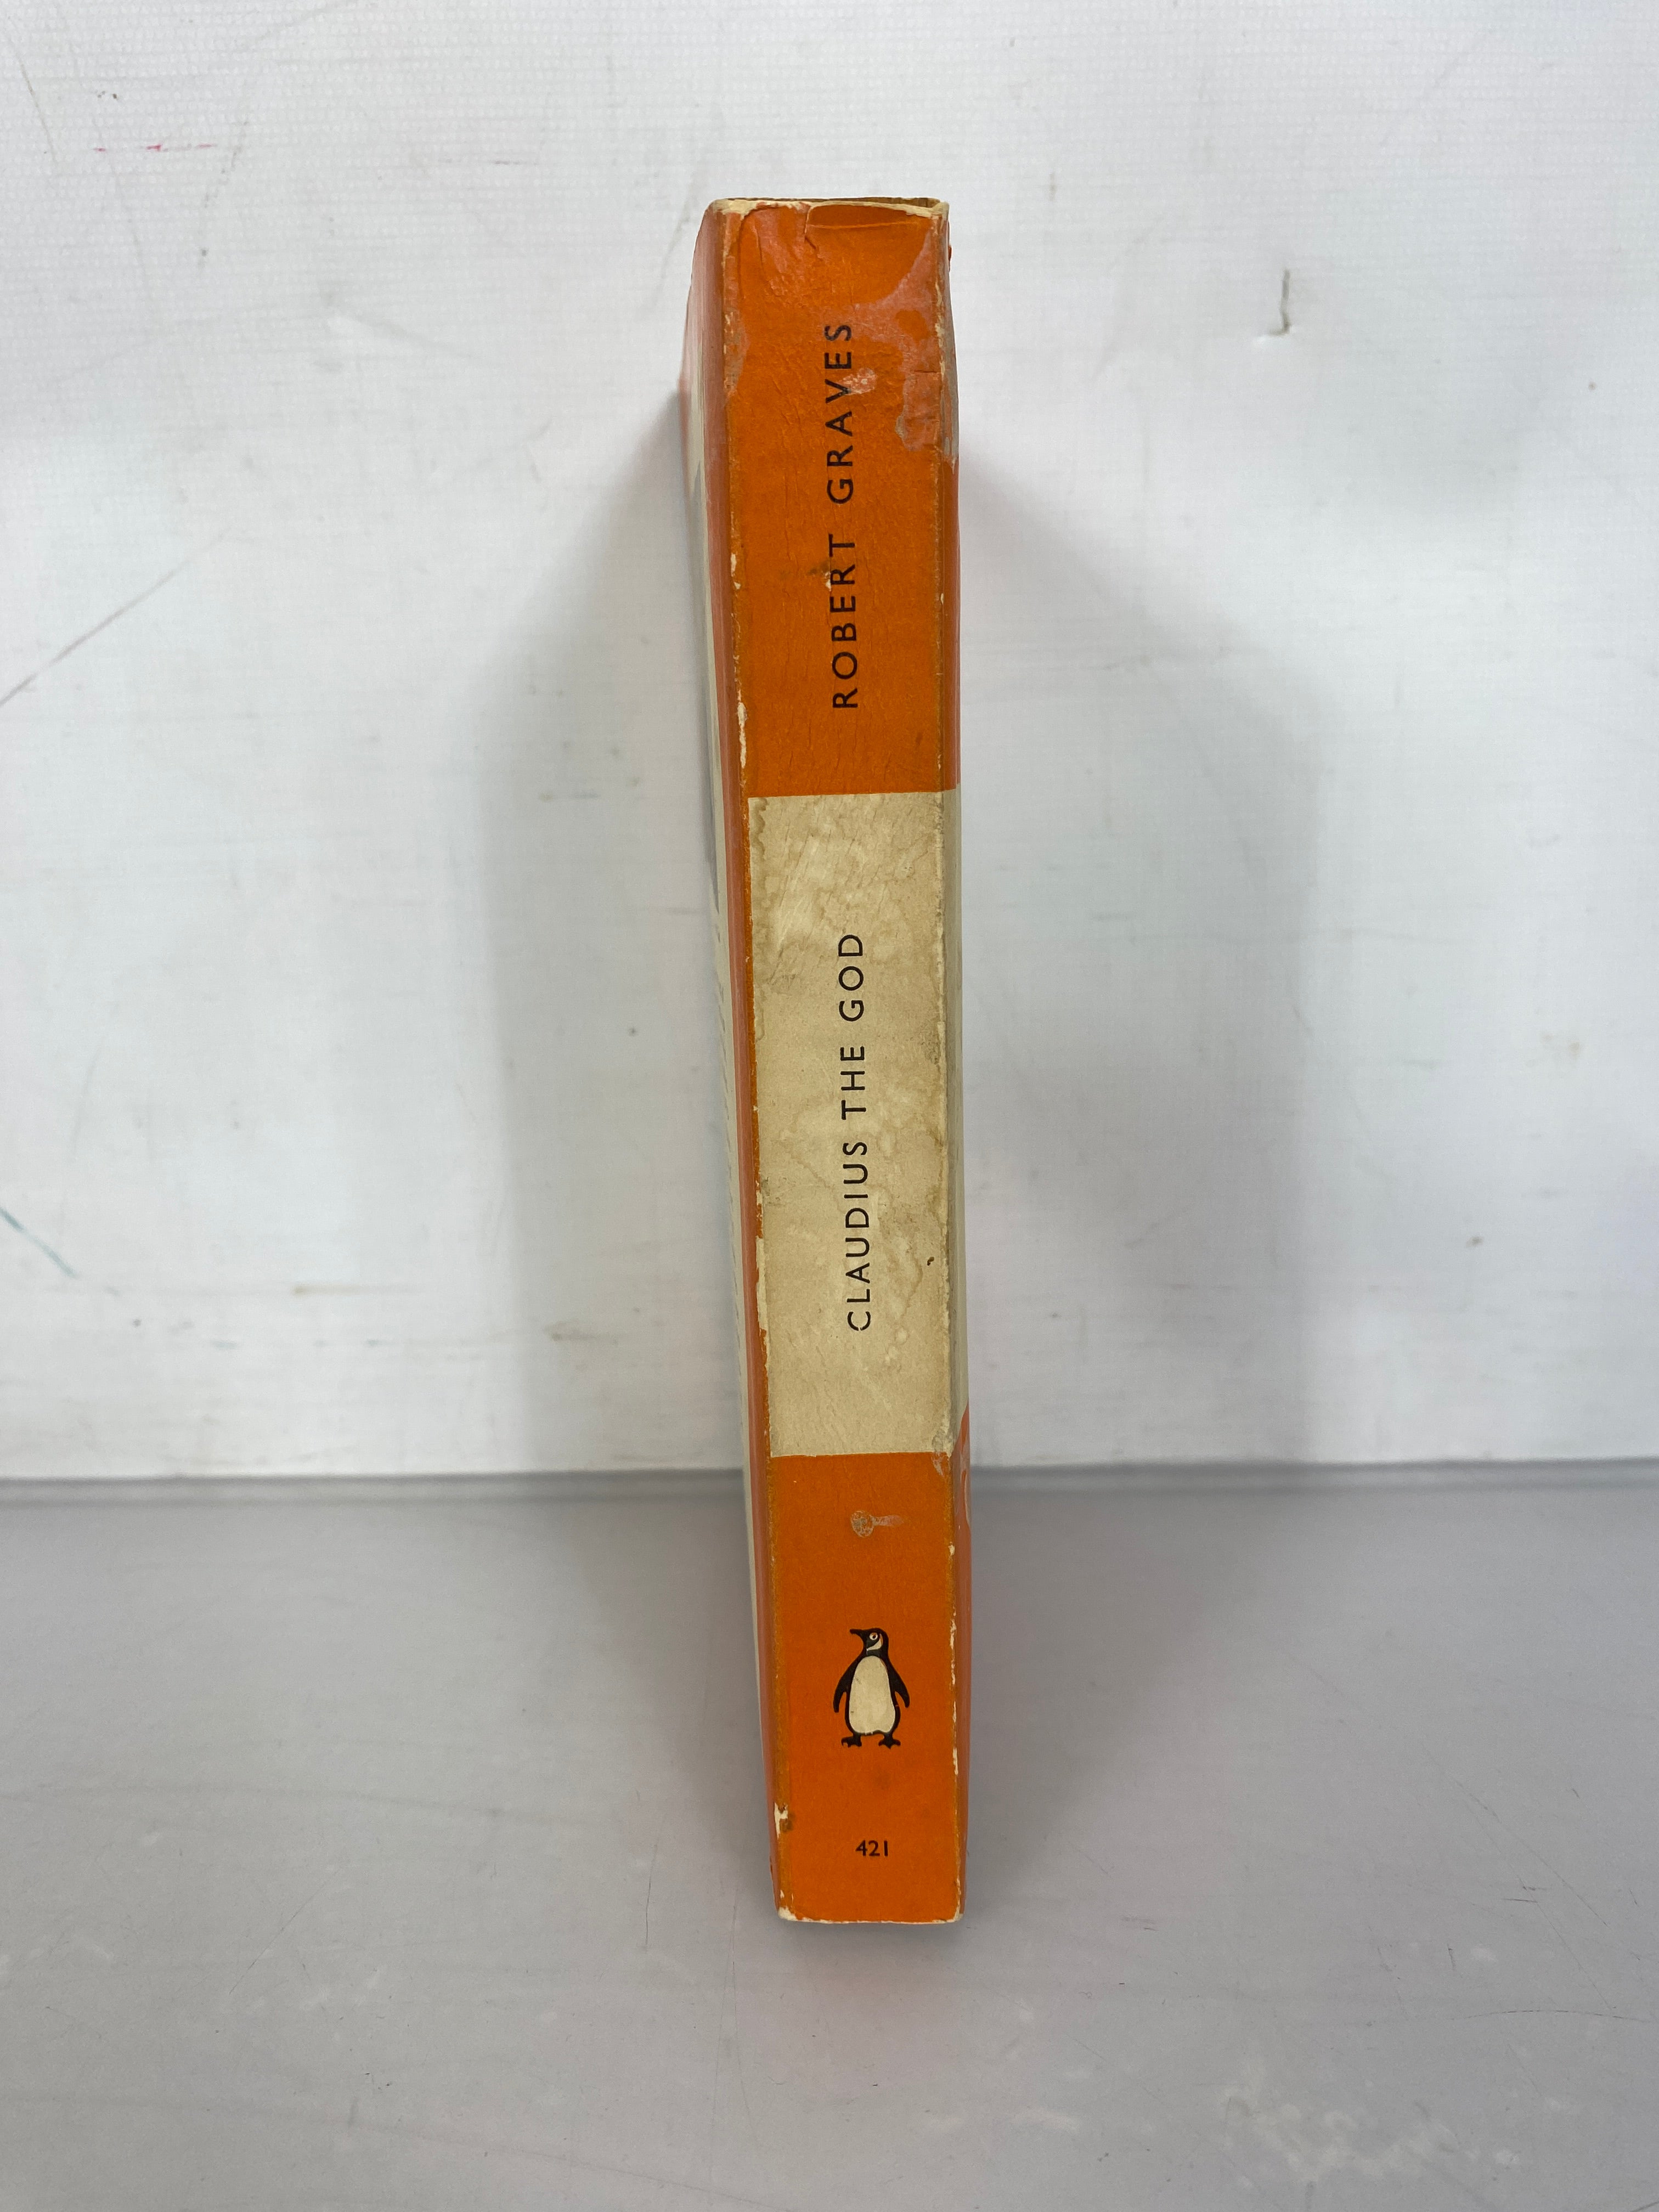 Claudius the God by Robert Graves Penguin Books 1956 SC